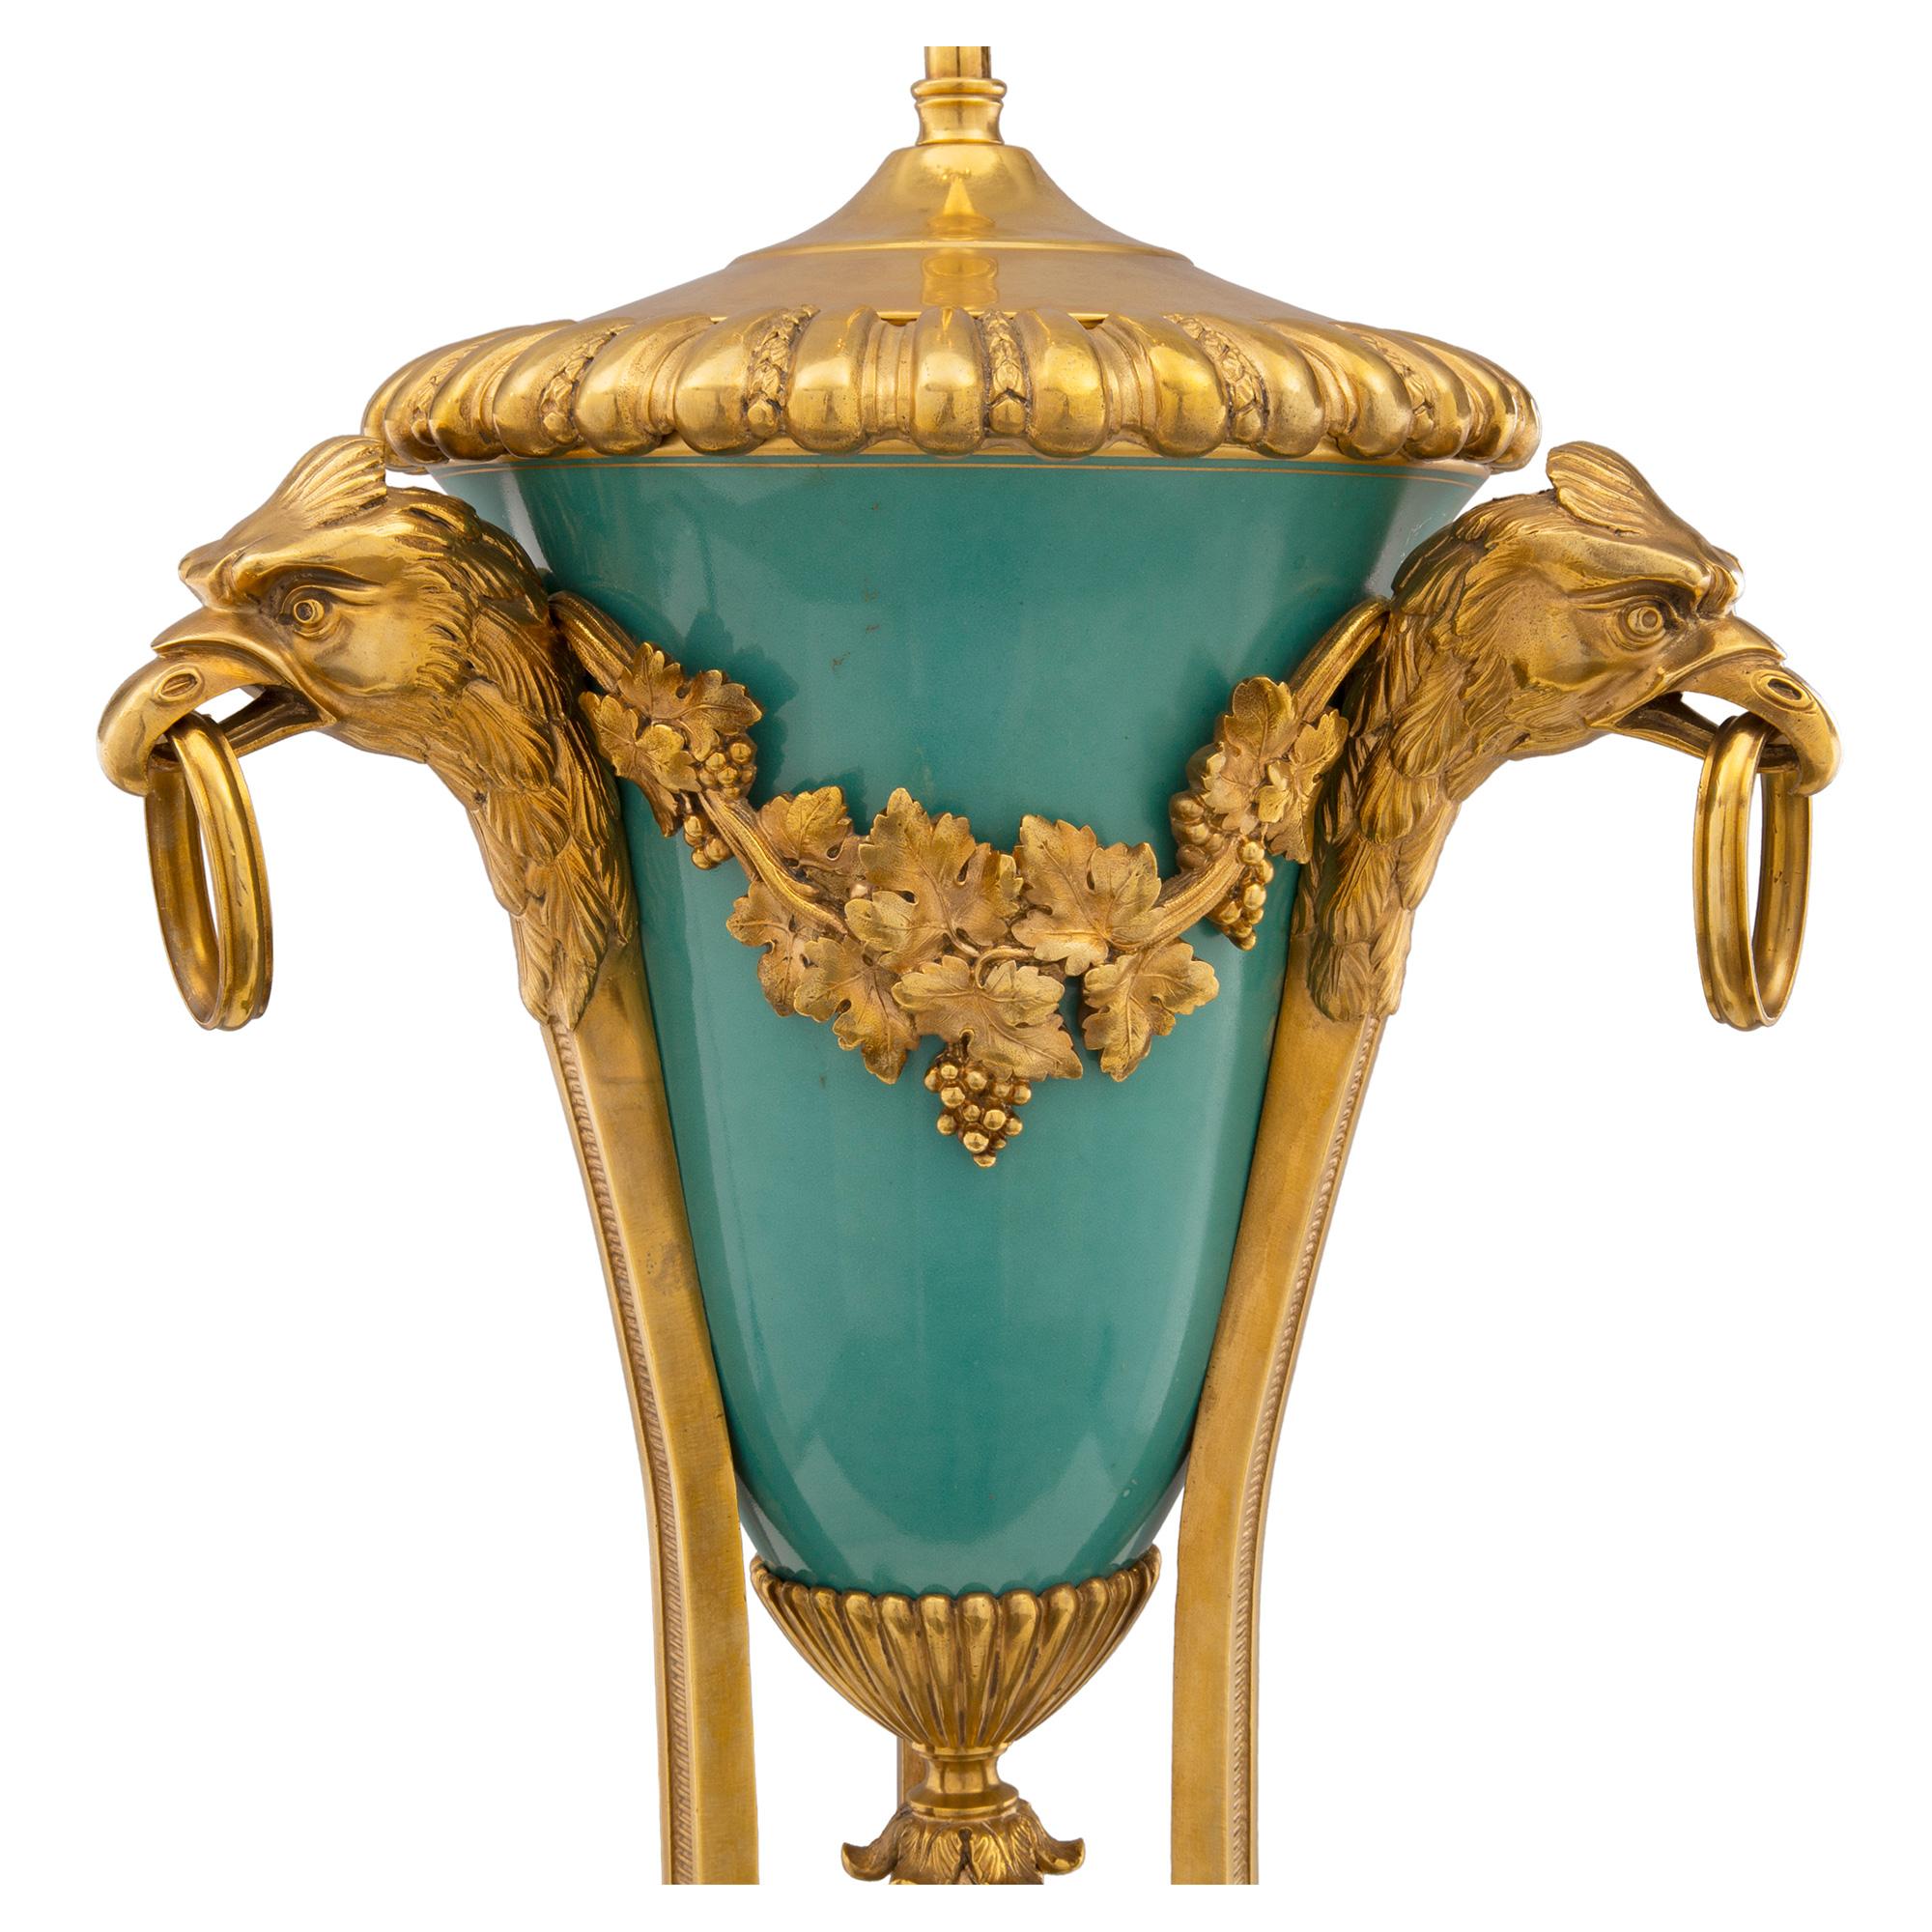 French 19th Century Louis XVI Style Ormolu and Porcelain Lamp, Signed by Sèvres In Good Condition For Sale In West Palm Beach, FL